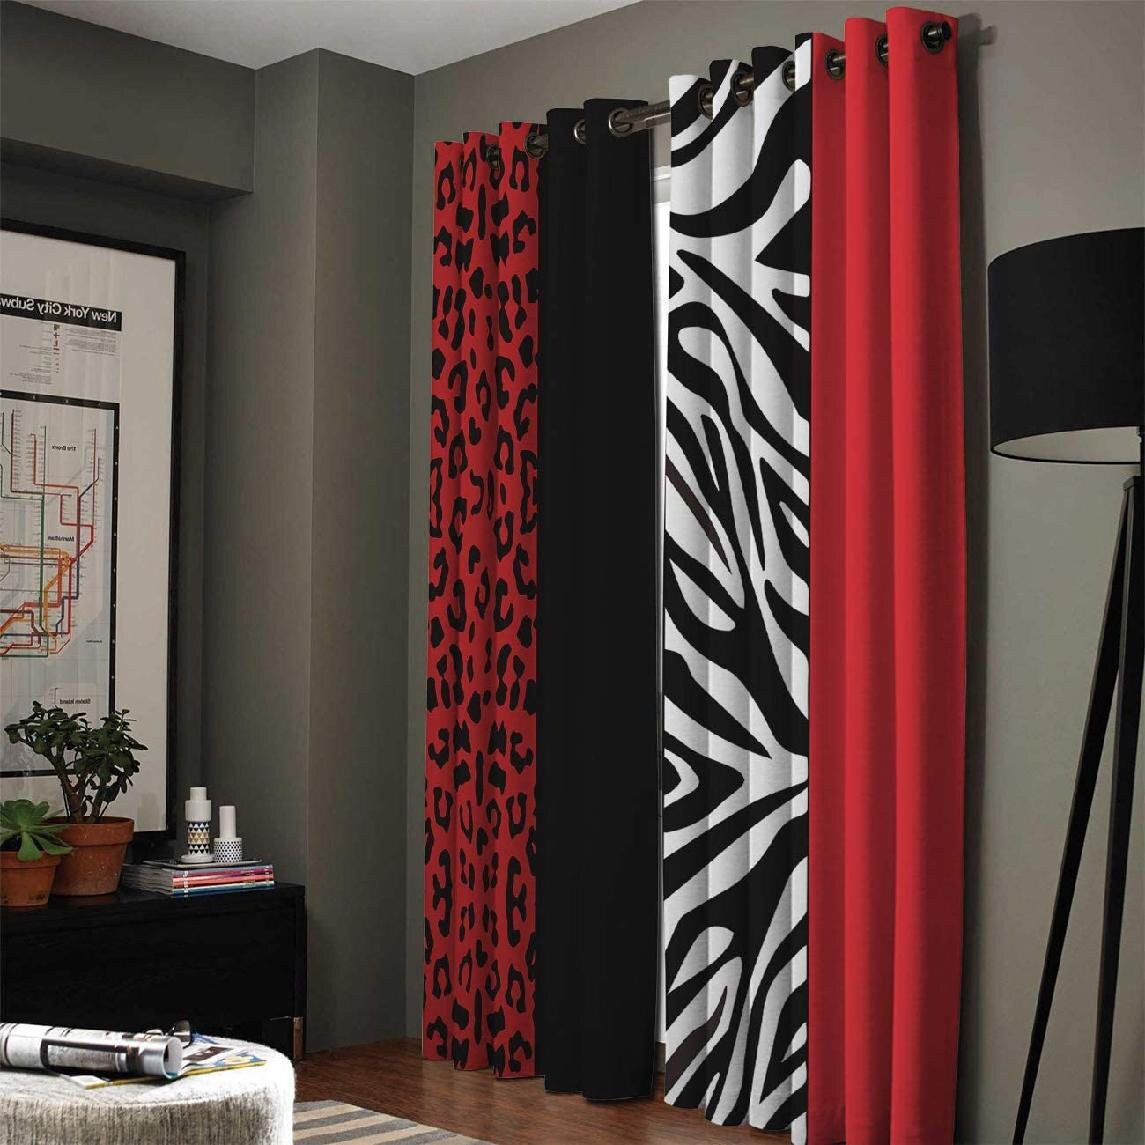 Blackout Curtain Thermal Insulated Room Darkening for Bedroom/Livingroom,2 Panel 